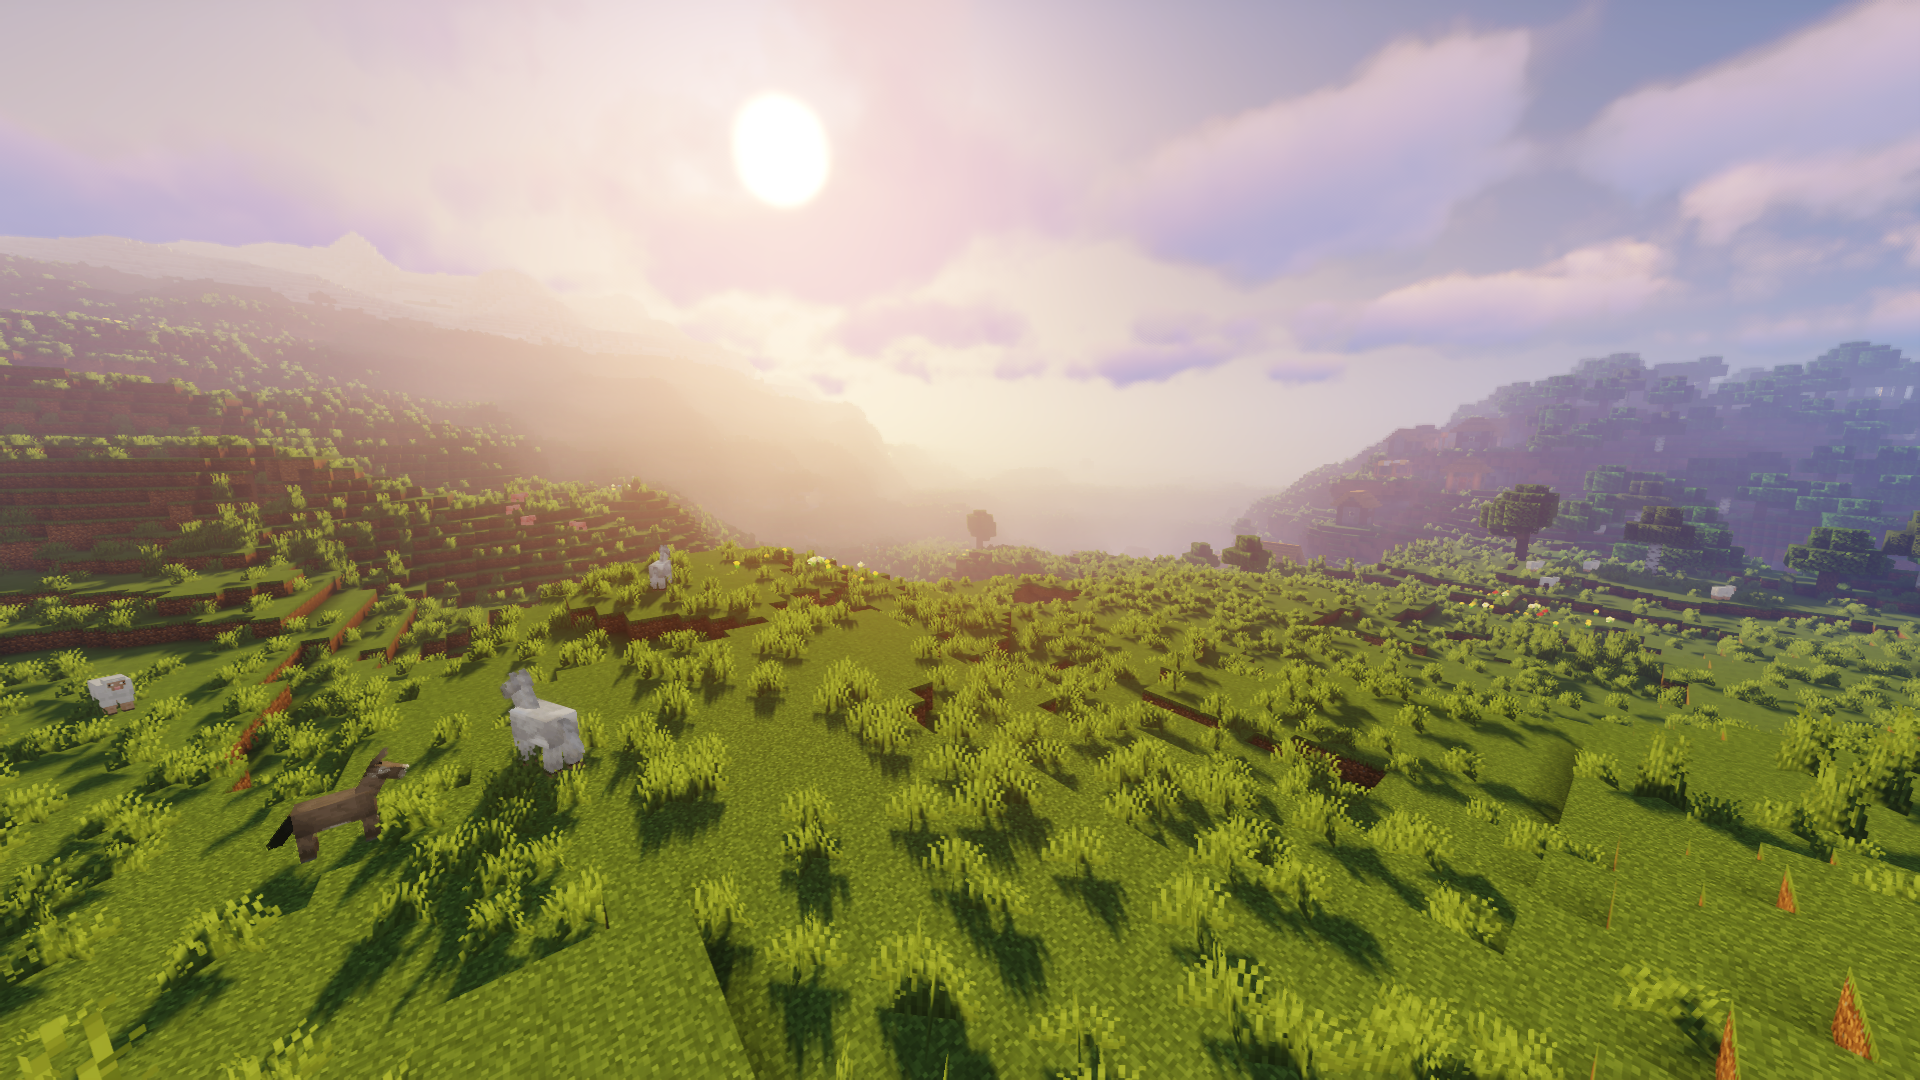 Minecraft Video Games Morning Mountain Top Grass Sunlight Sun Sky Clouds Cube Shaders 1920x1080